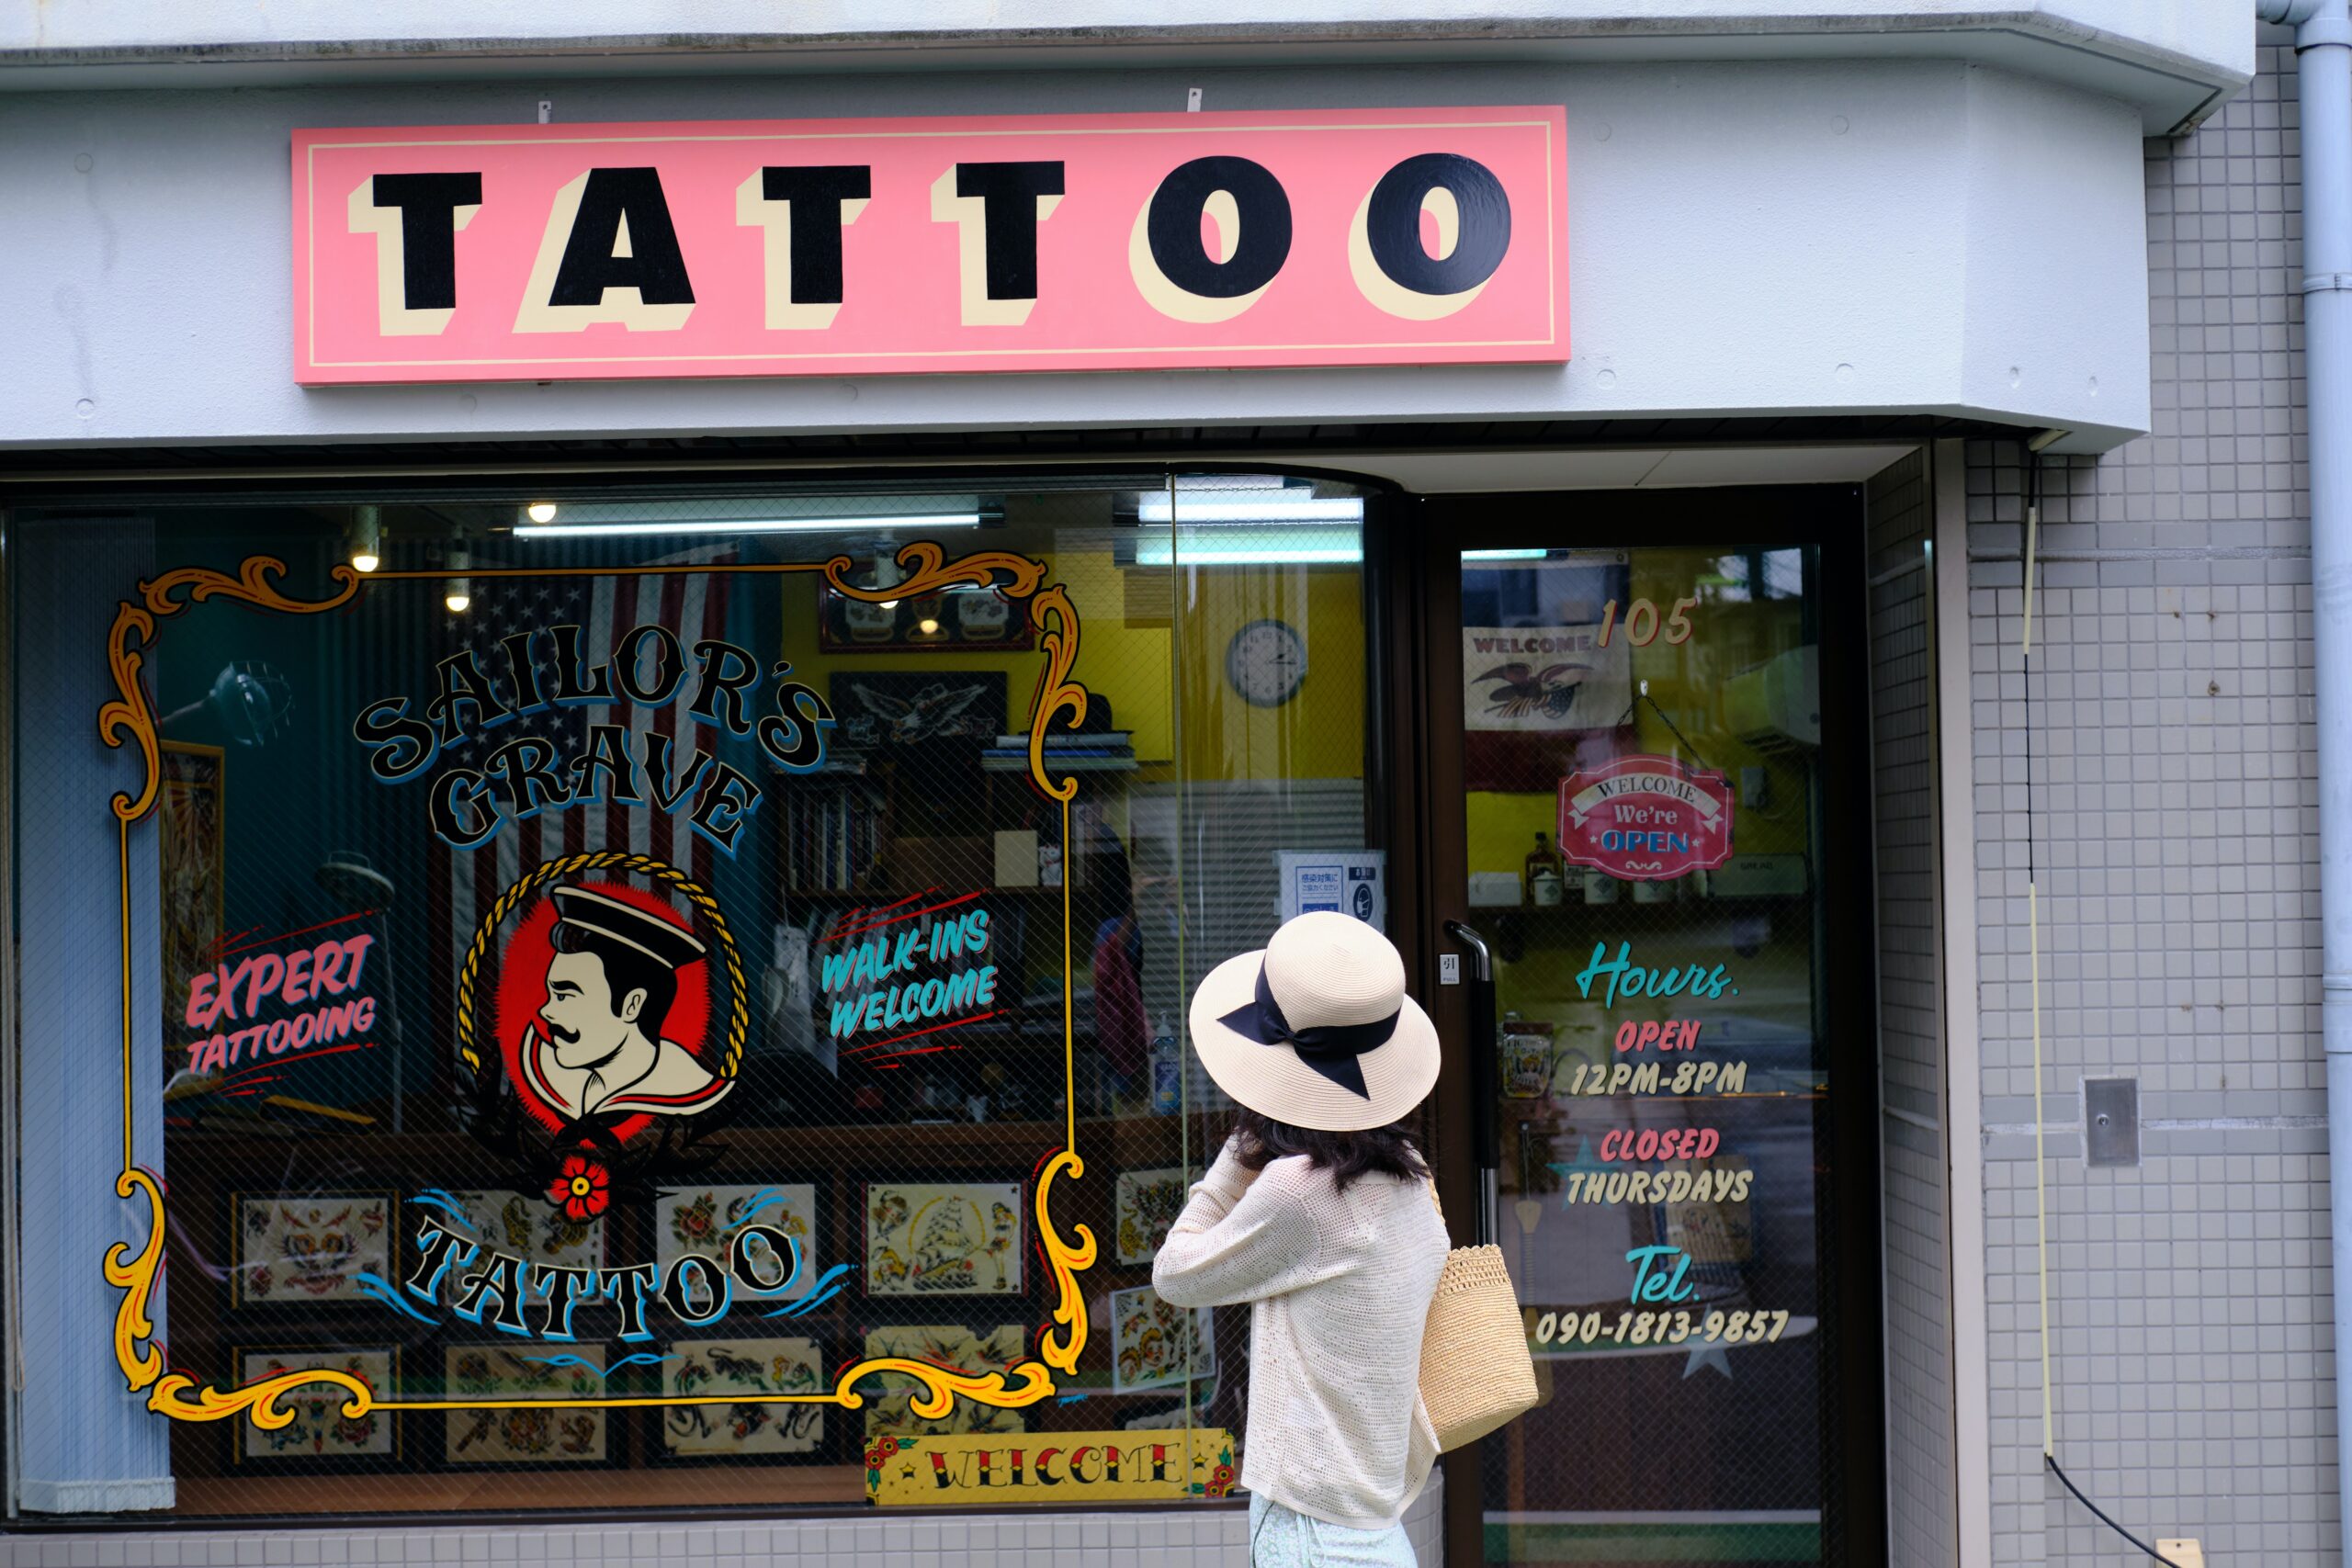 5 Important Qualities To Look For in a Tattoo Shop